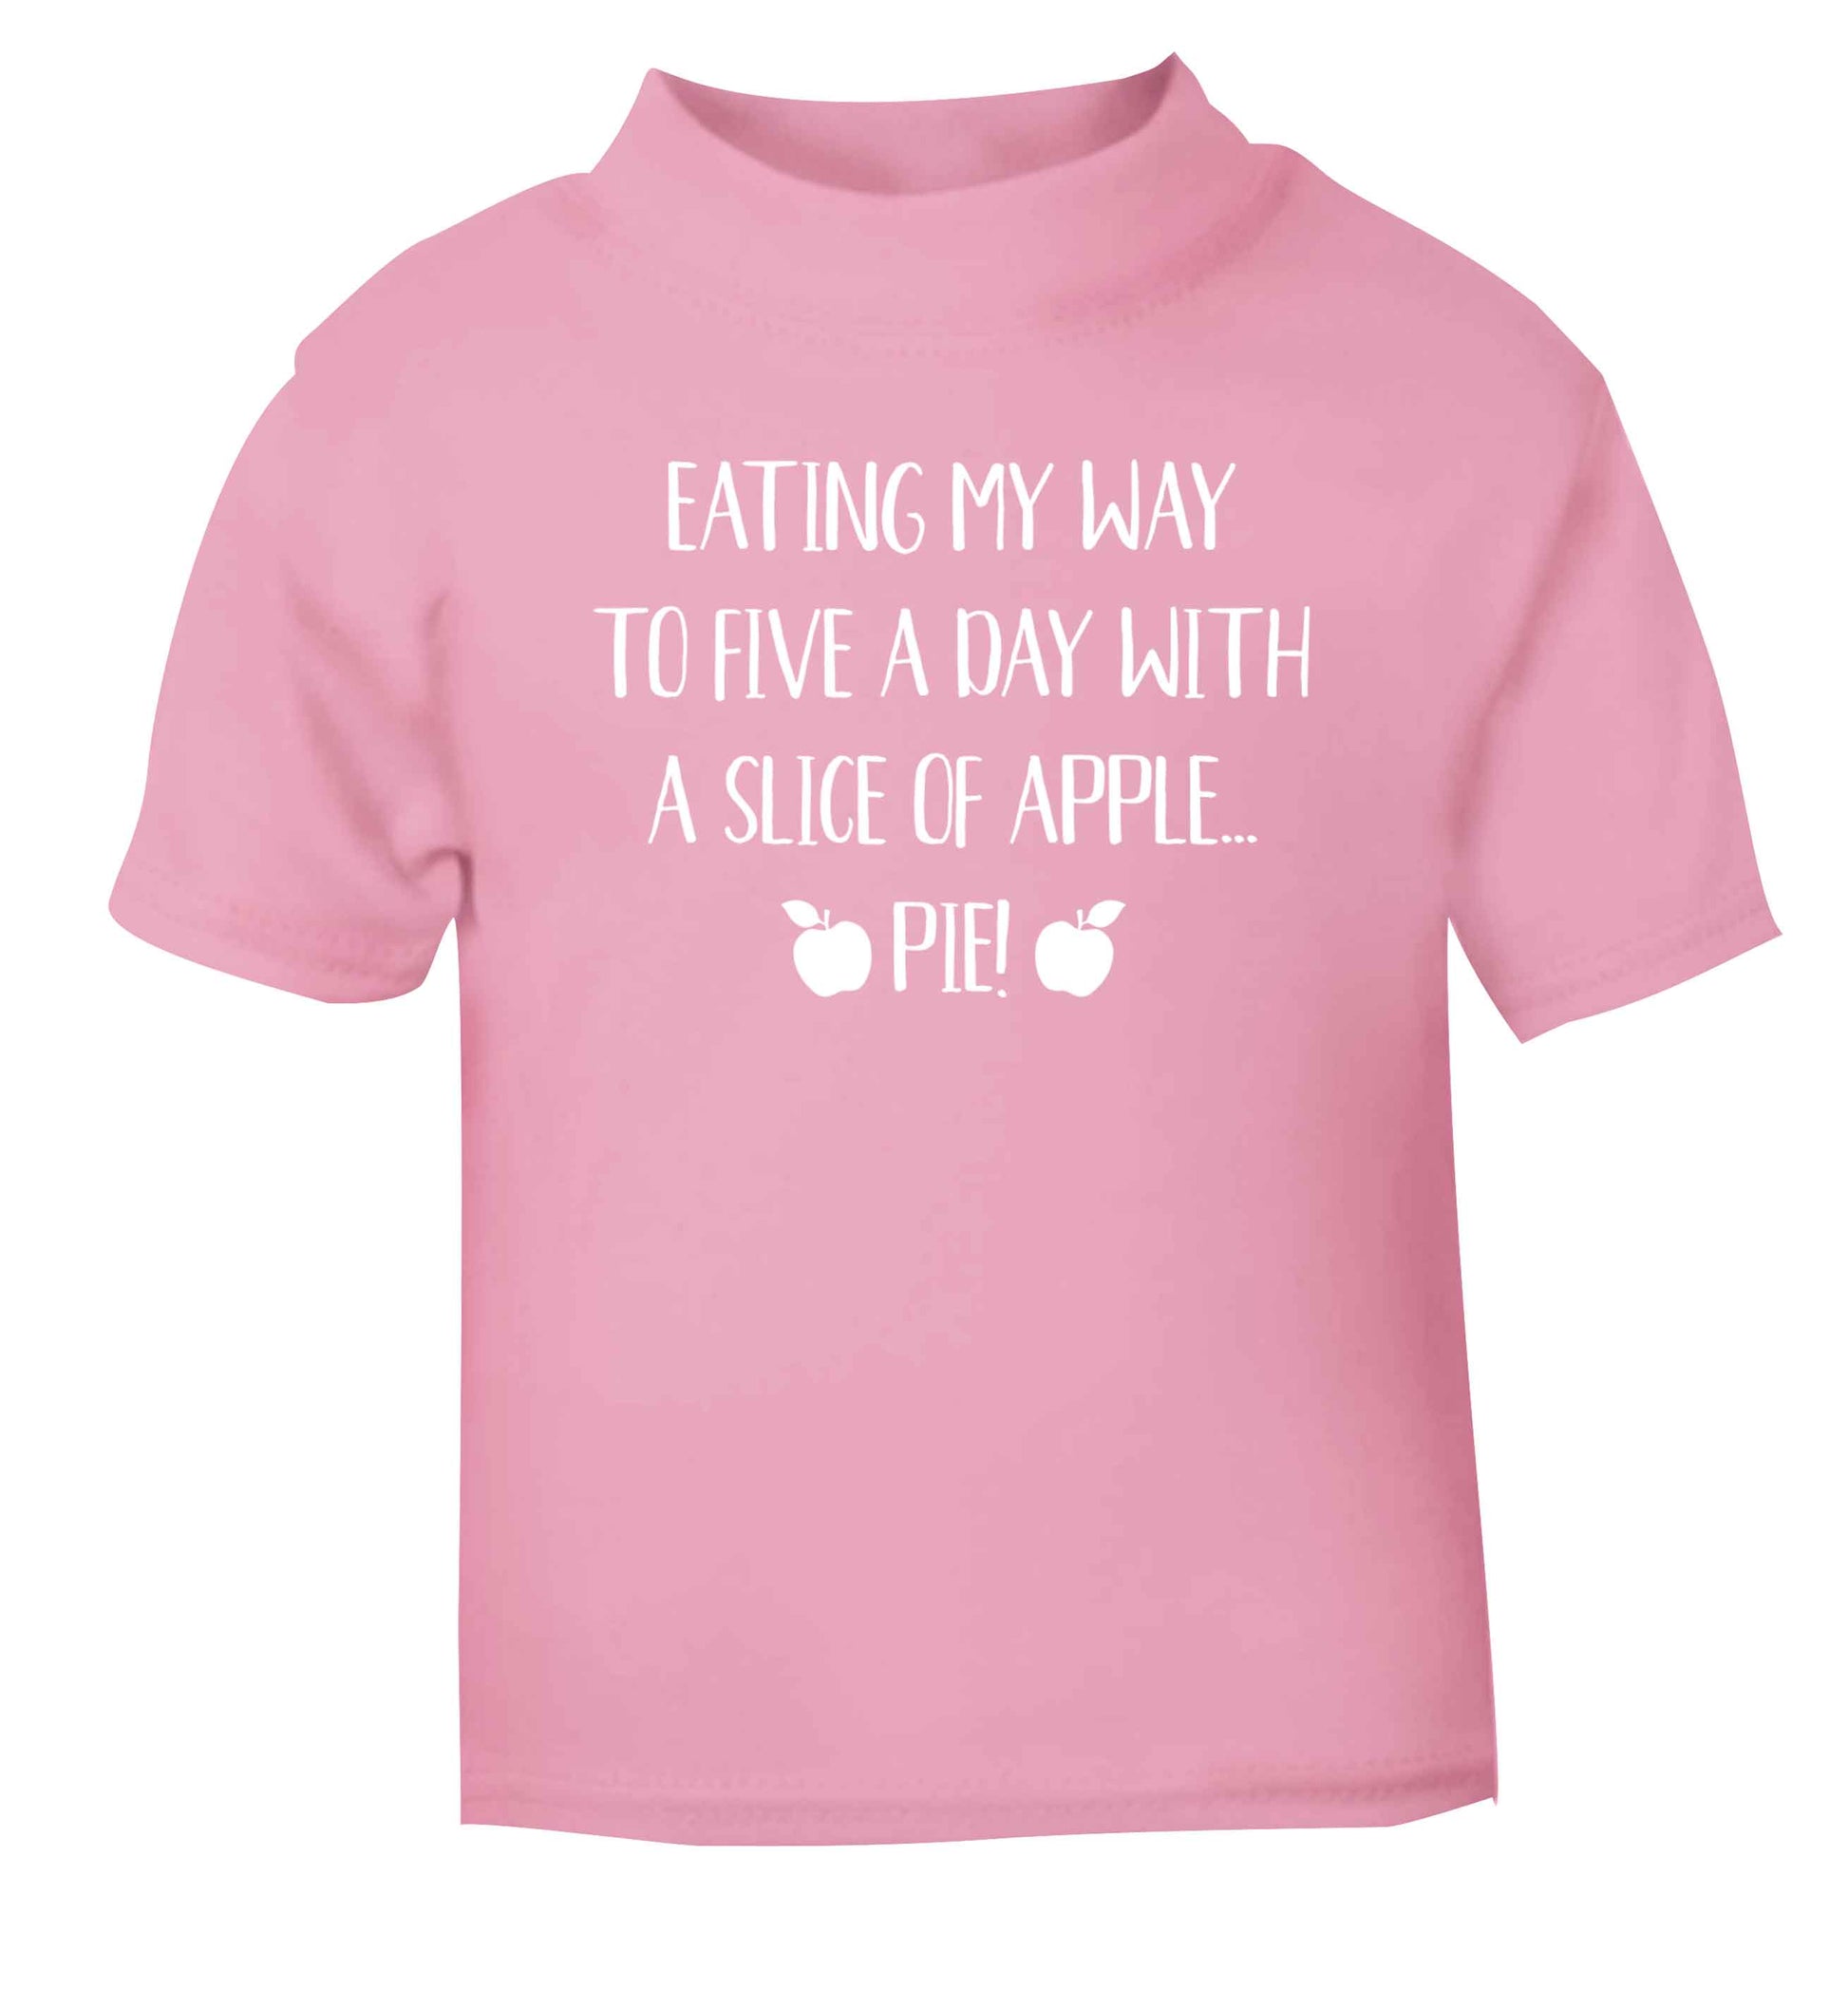 Eating my way to five a day with a slice of apple pie light pink Baby Toddler Tshirt 2 Years